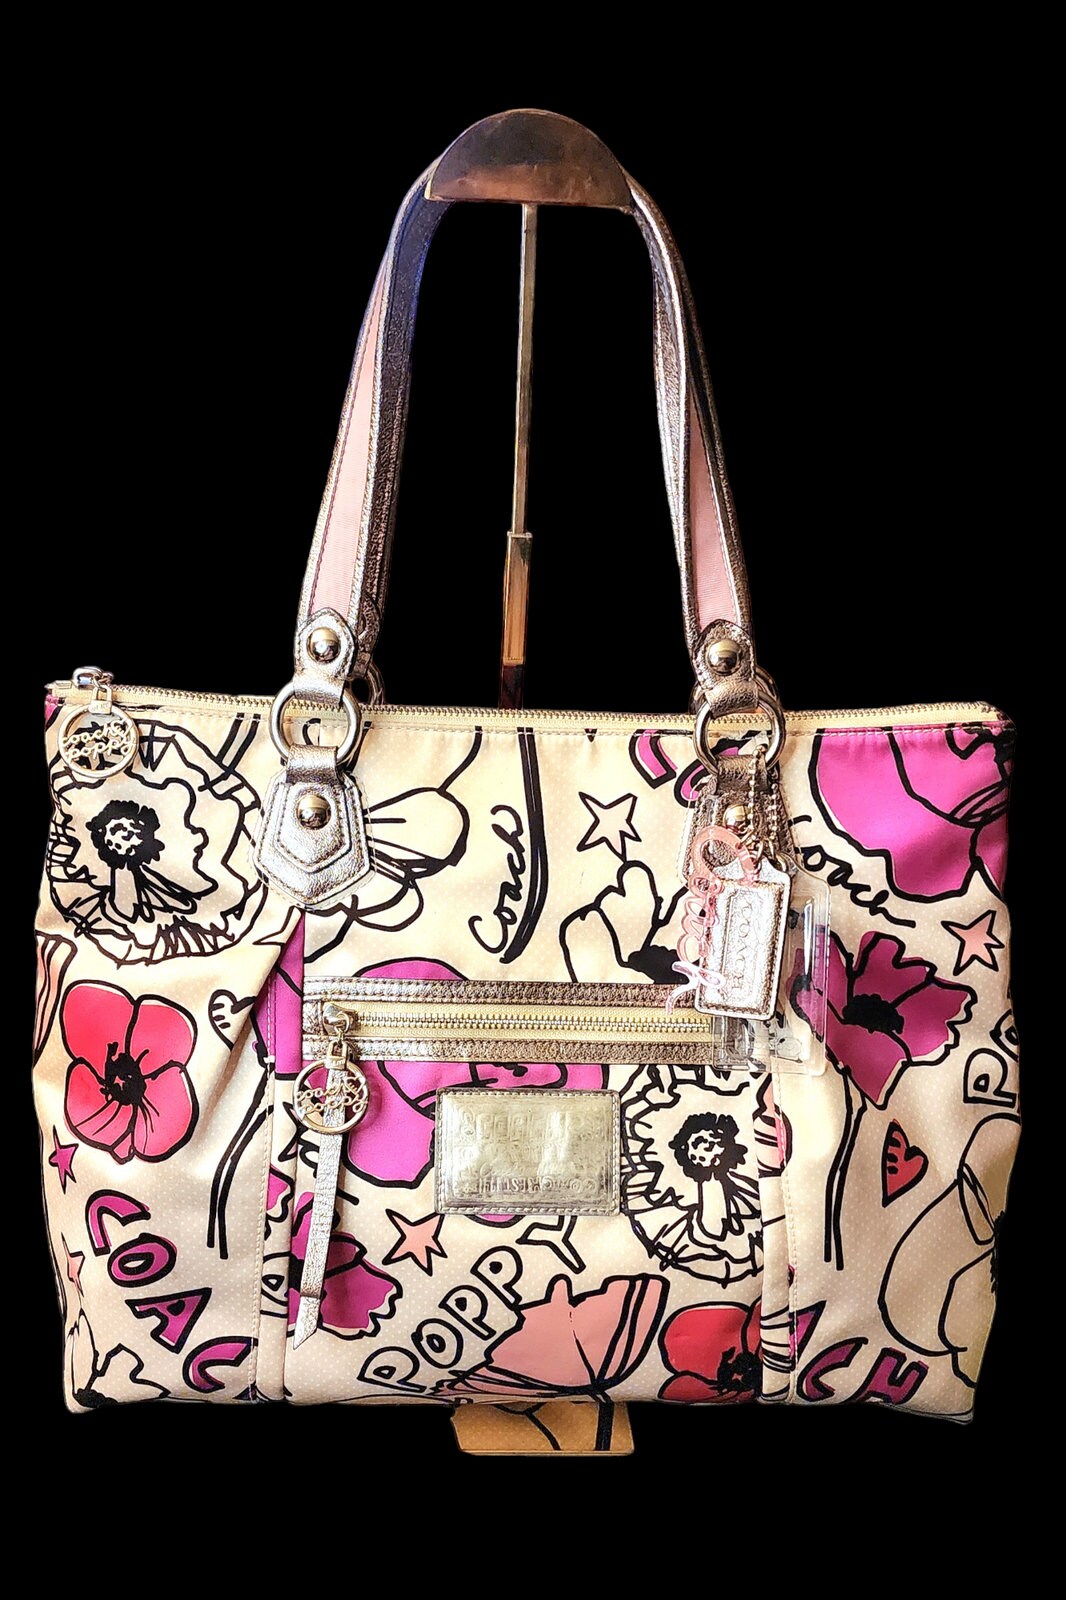 COACH 2 Way Tote Bag 13830 Canvas Leather Multicolor Poppy Authentic | eBay